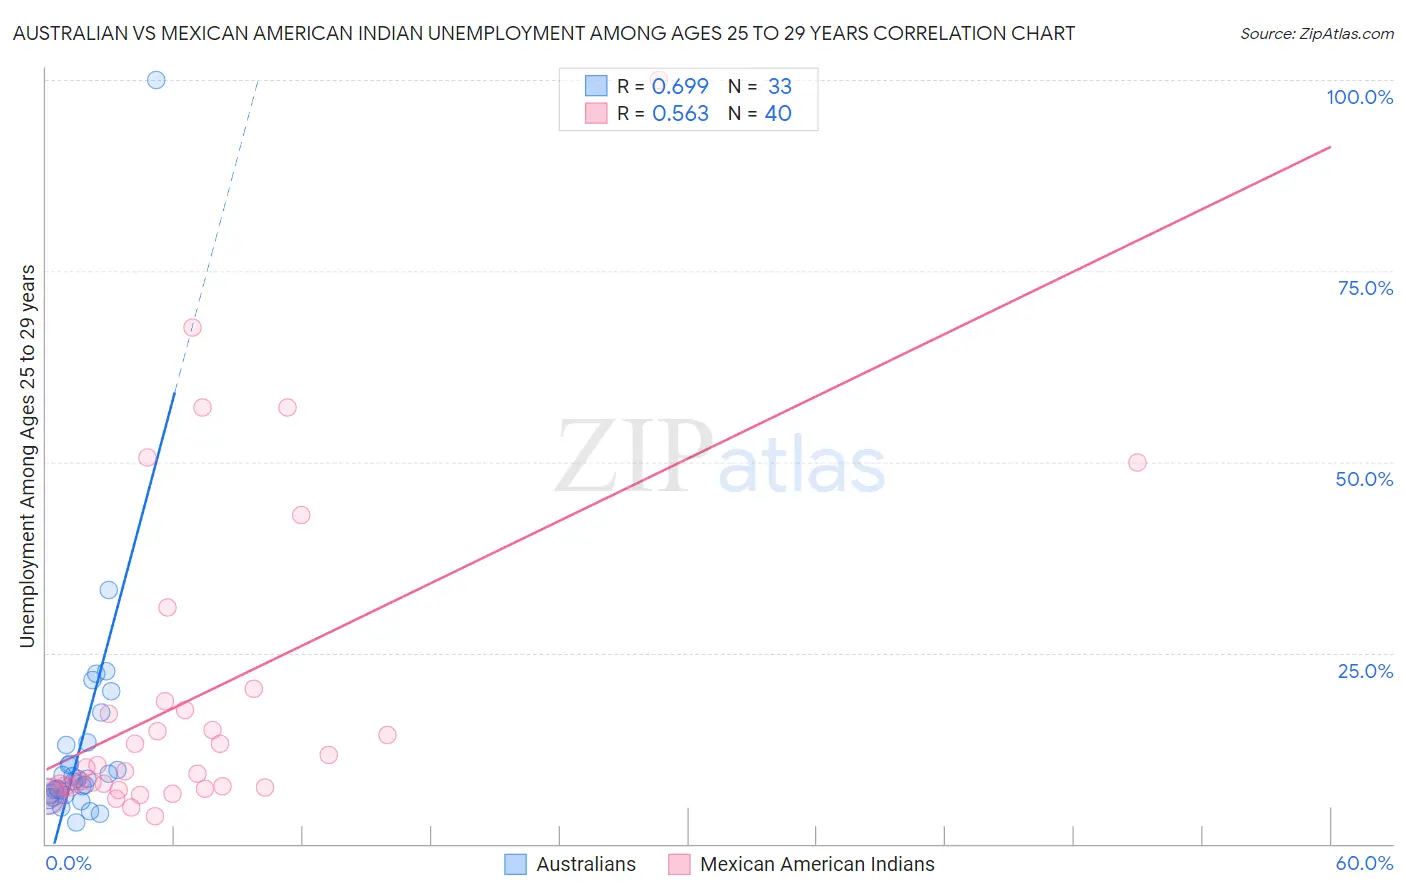 Australian vs Mexican American Indian Unemployment Among Ages 25 to 29 years